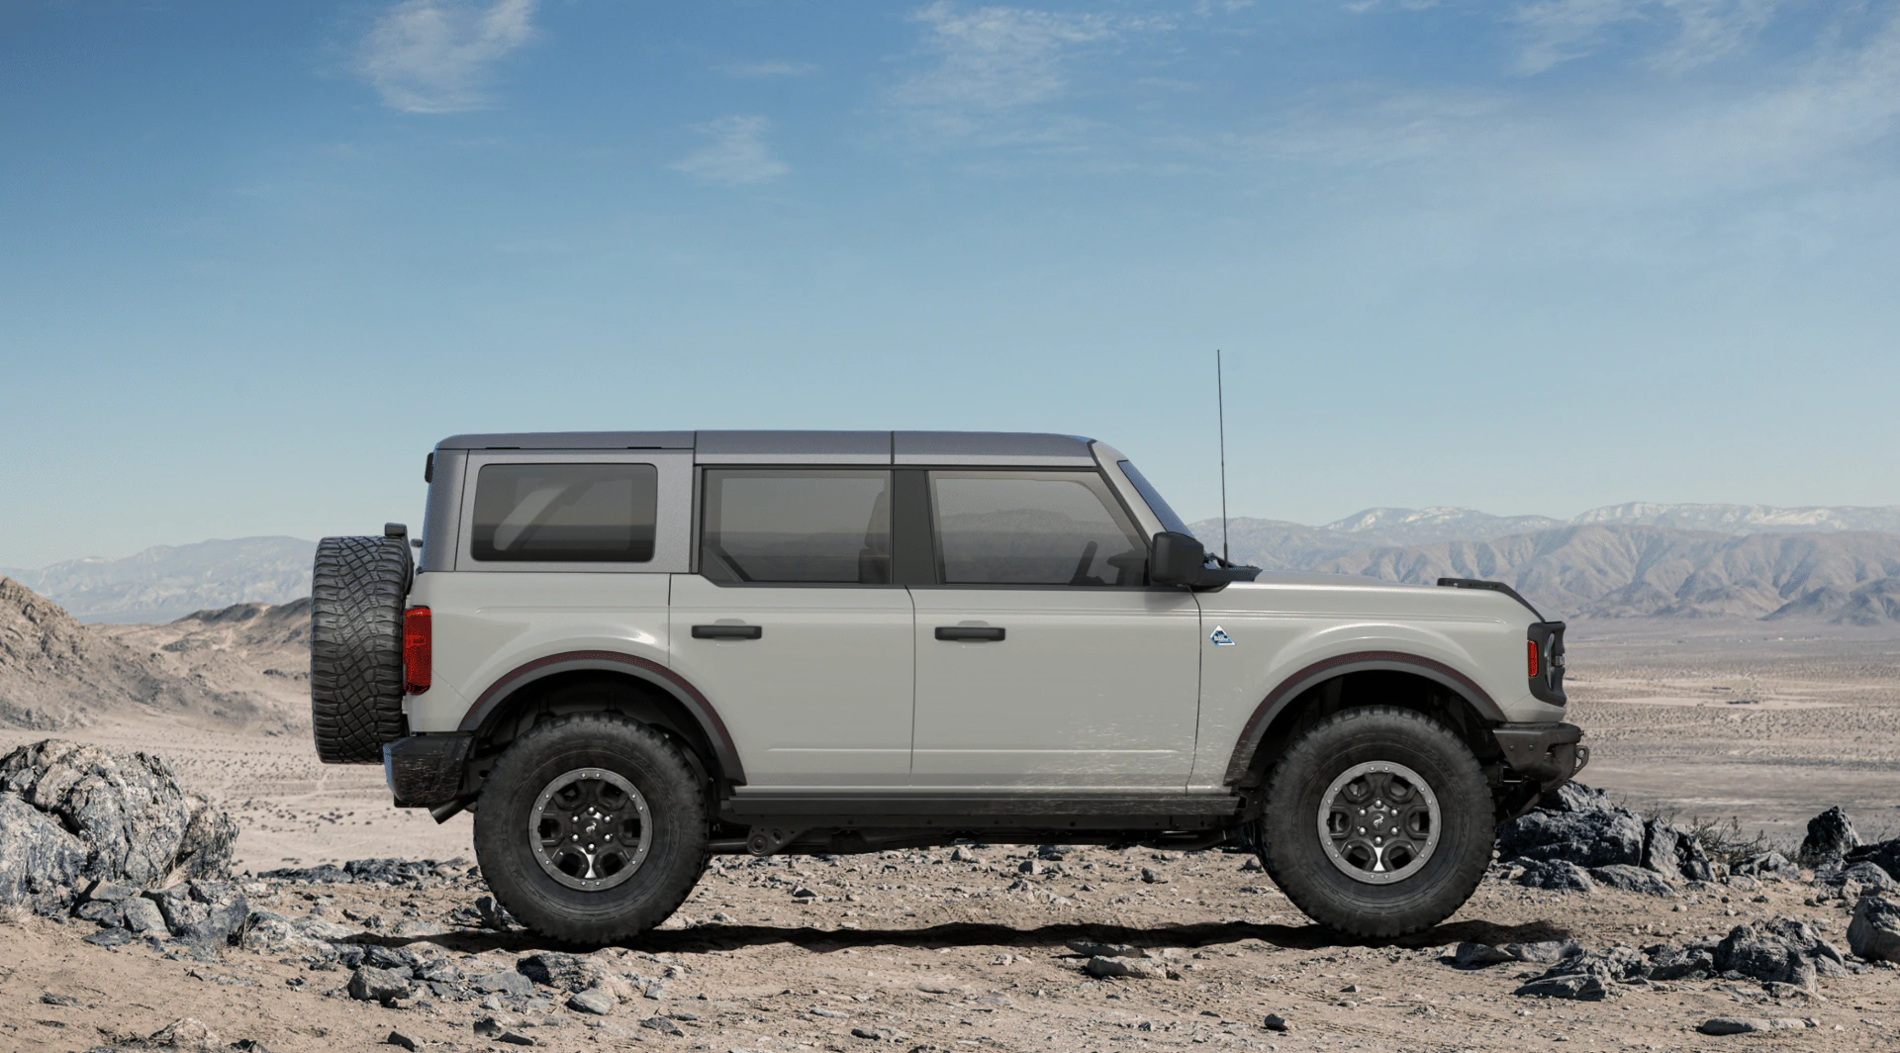 Ford Bronco Levine Confirms Cactus Gray Color Change on Build and Price 1612815926313